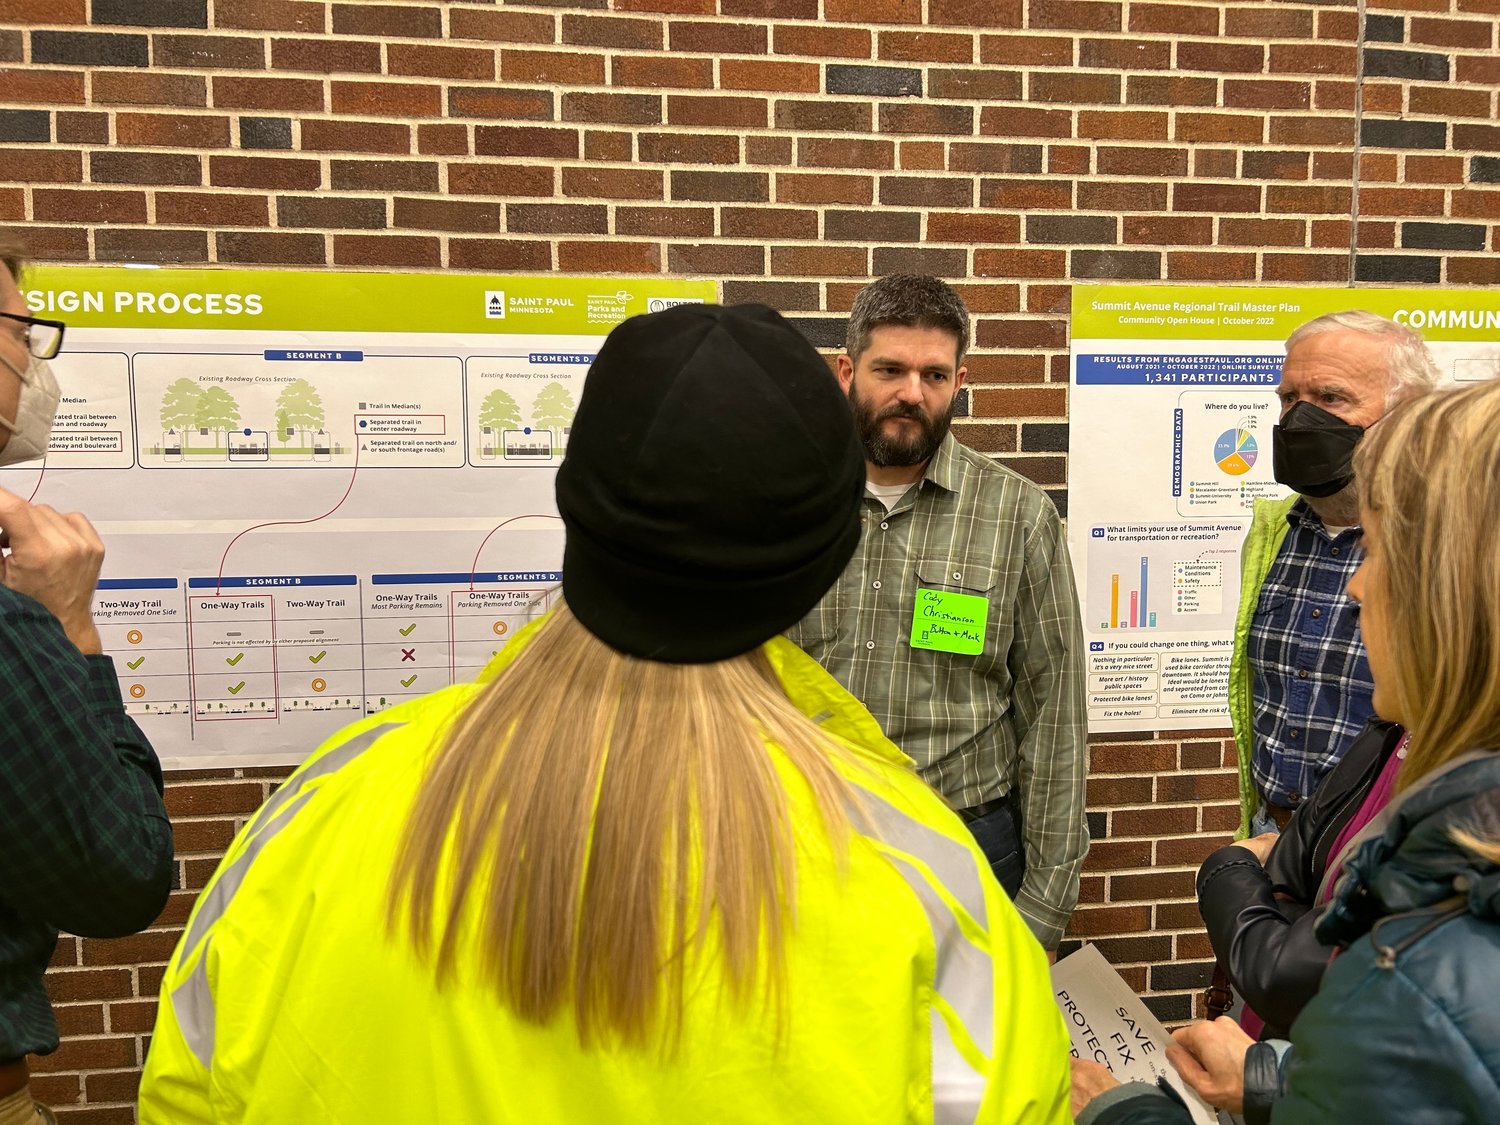 Cody Christianson answers attendees' questions about the design process of the various bike lanes. They aim to enhance safety but also keep parking, pedestrians, and cars in mind. (Photo by Chloe Peter)